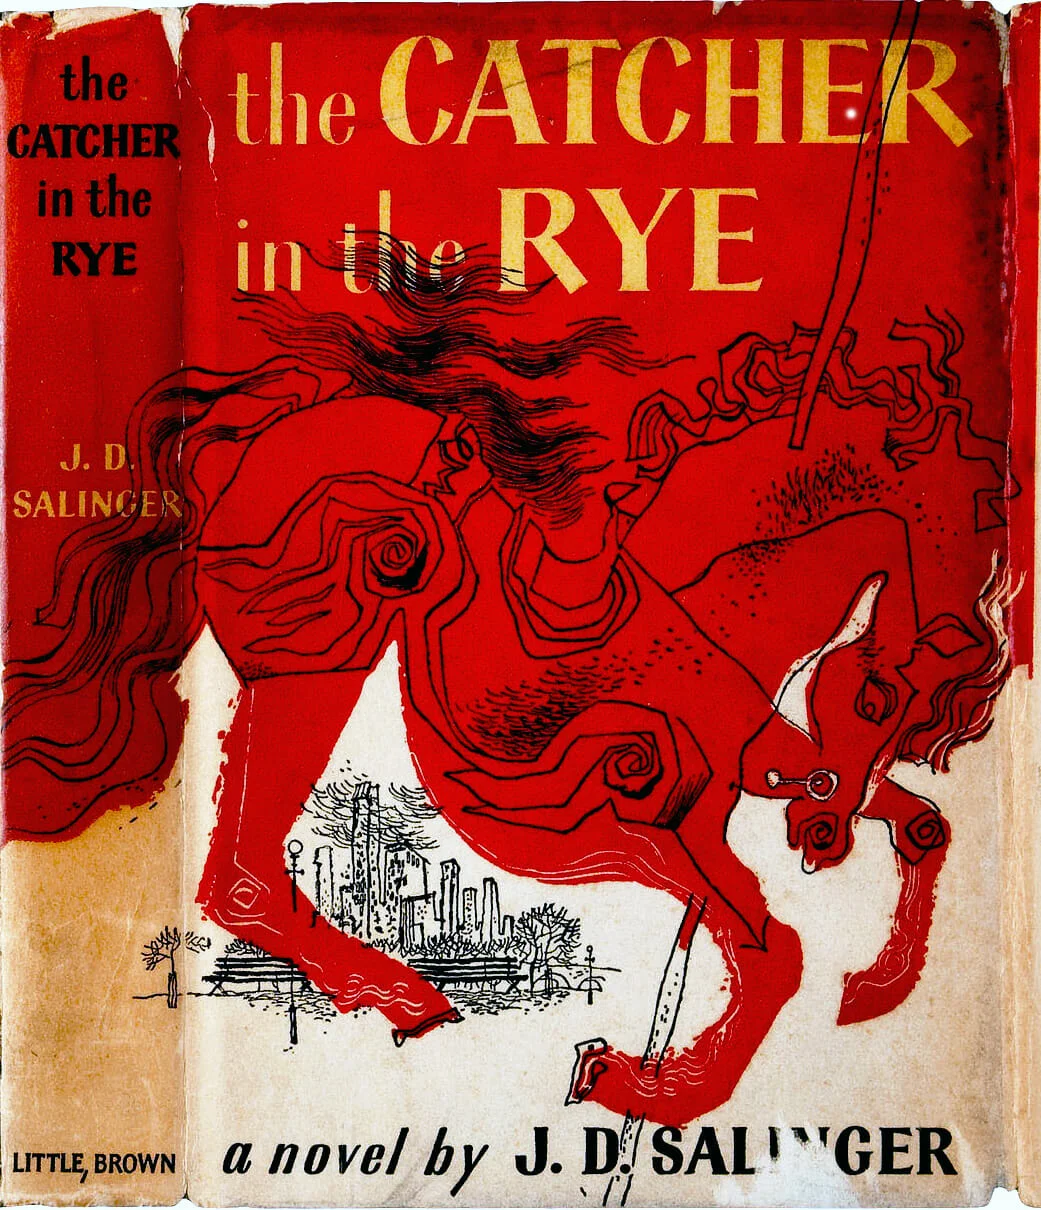 The Catcher in the Rye | Finding one's place in the world